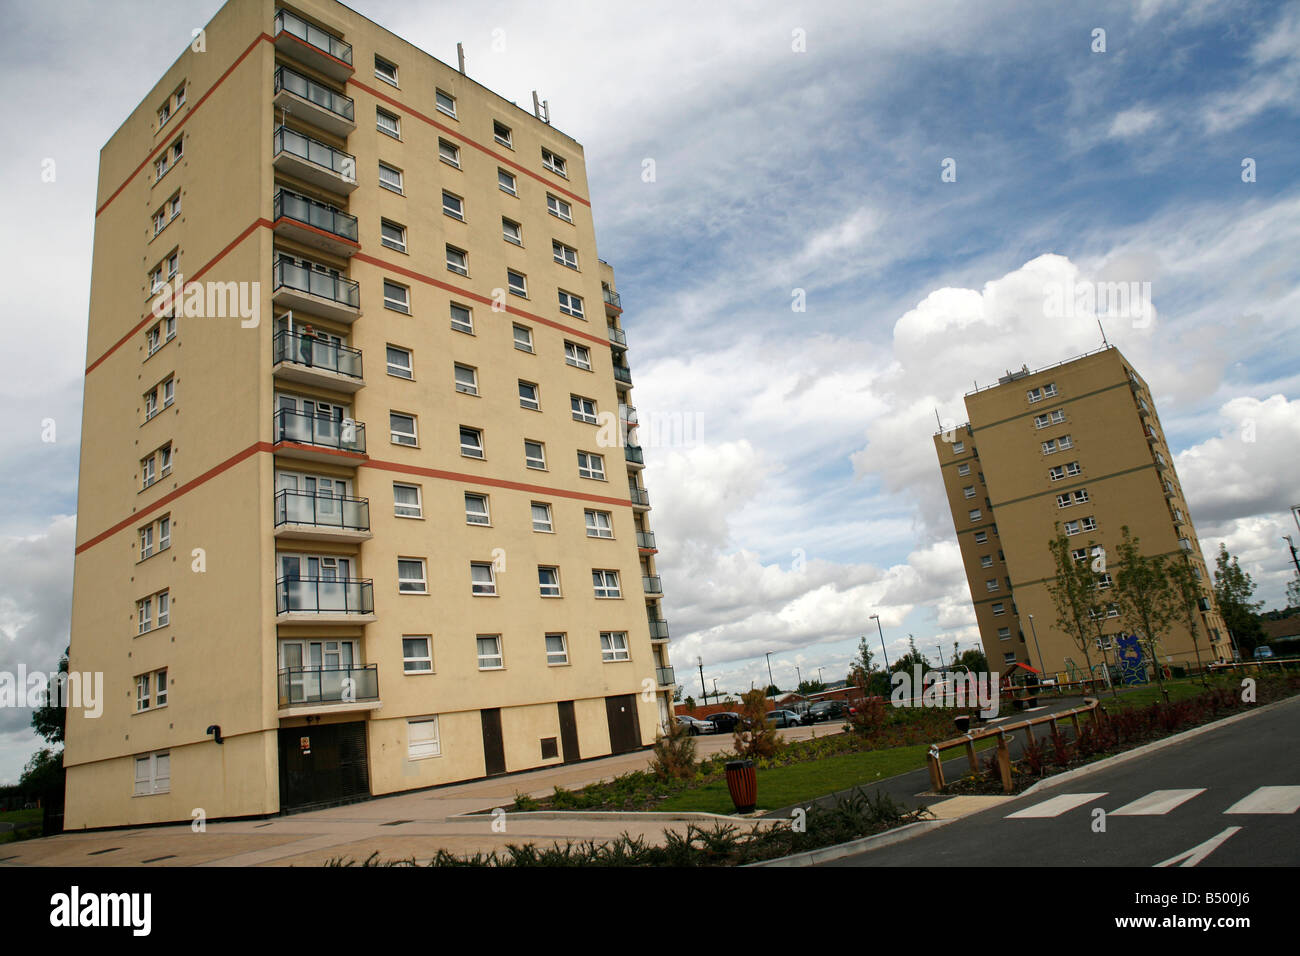 2 high rise flats on a council estate in Bristol Stock Photo